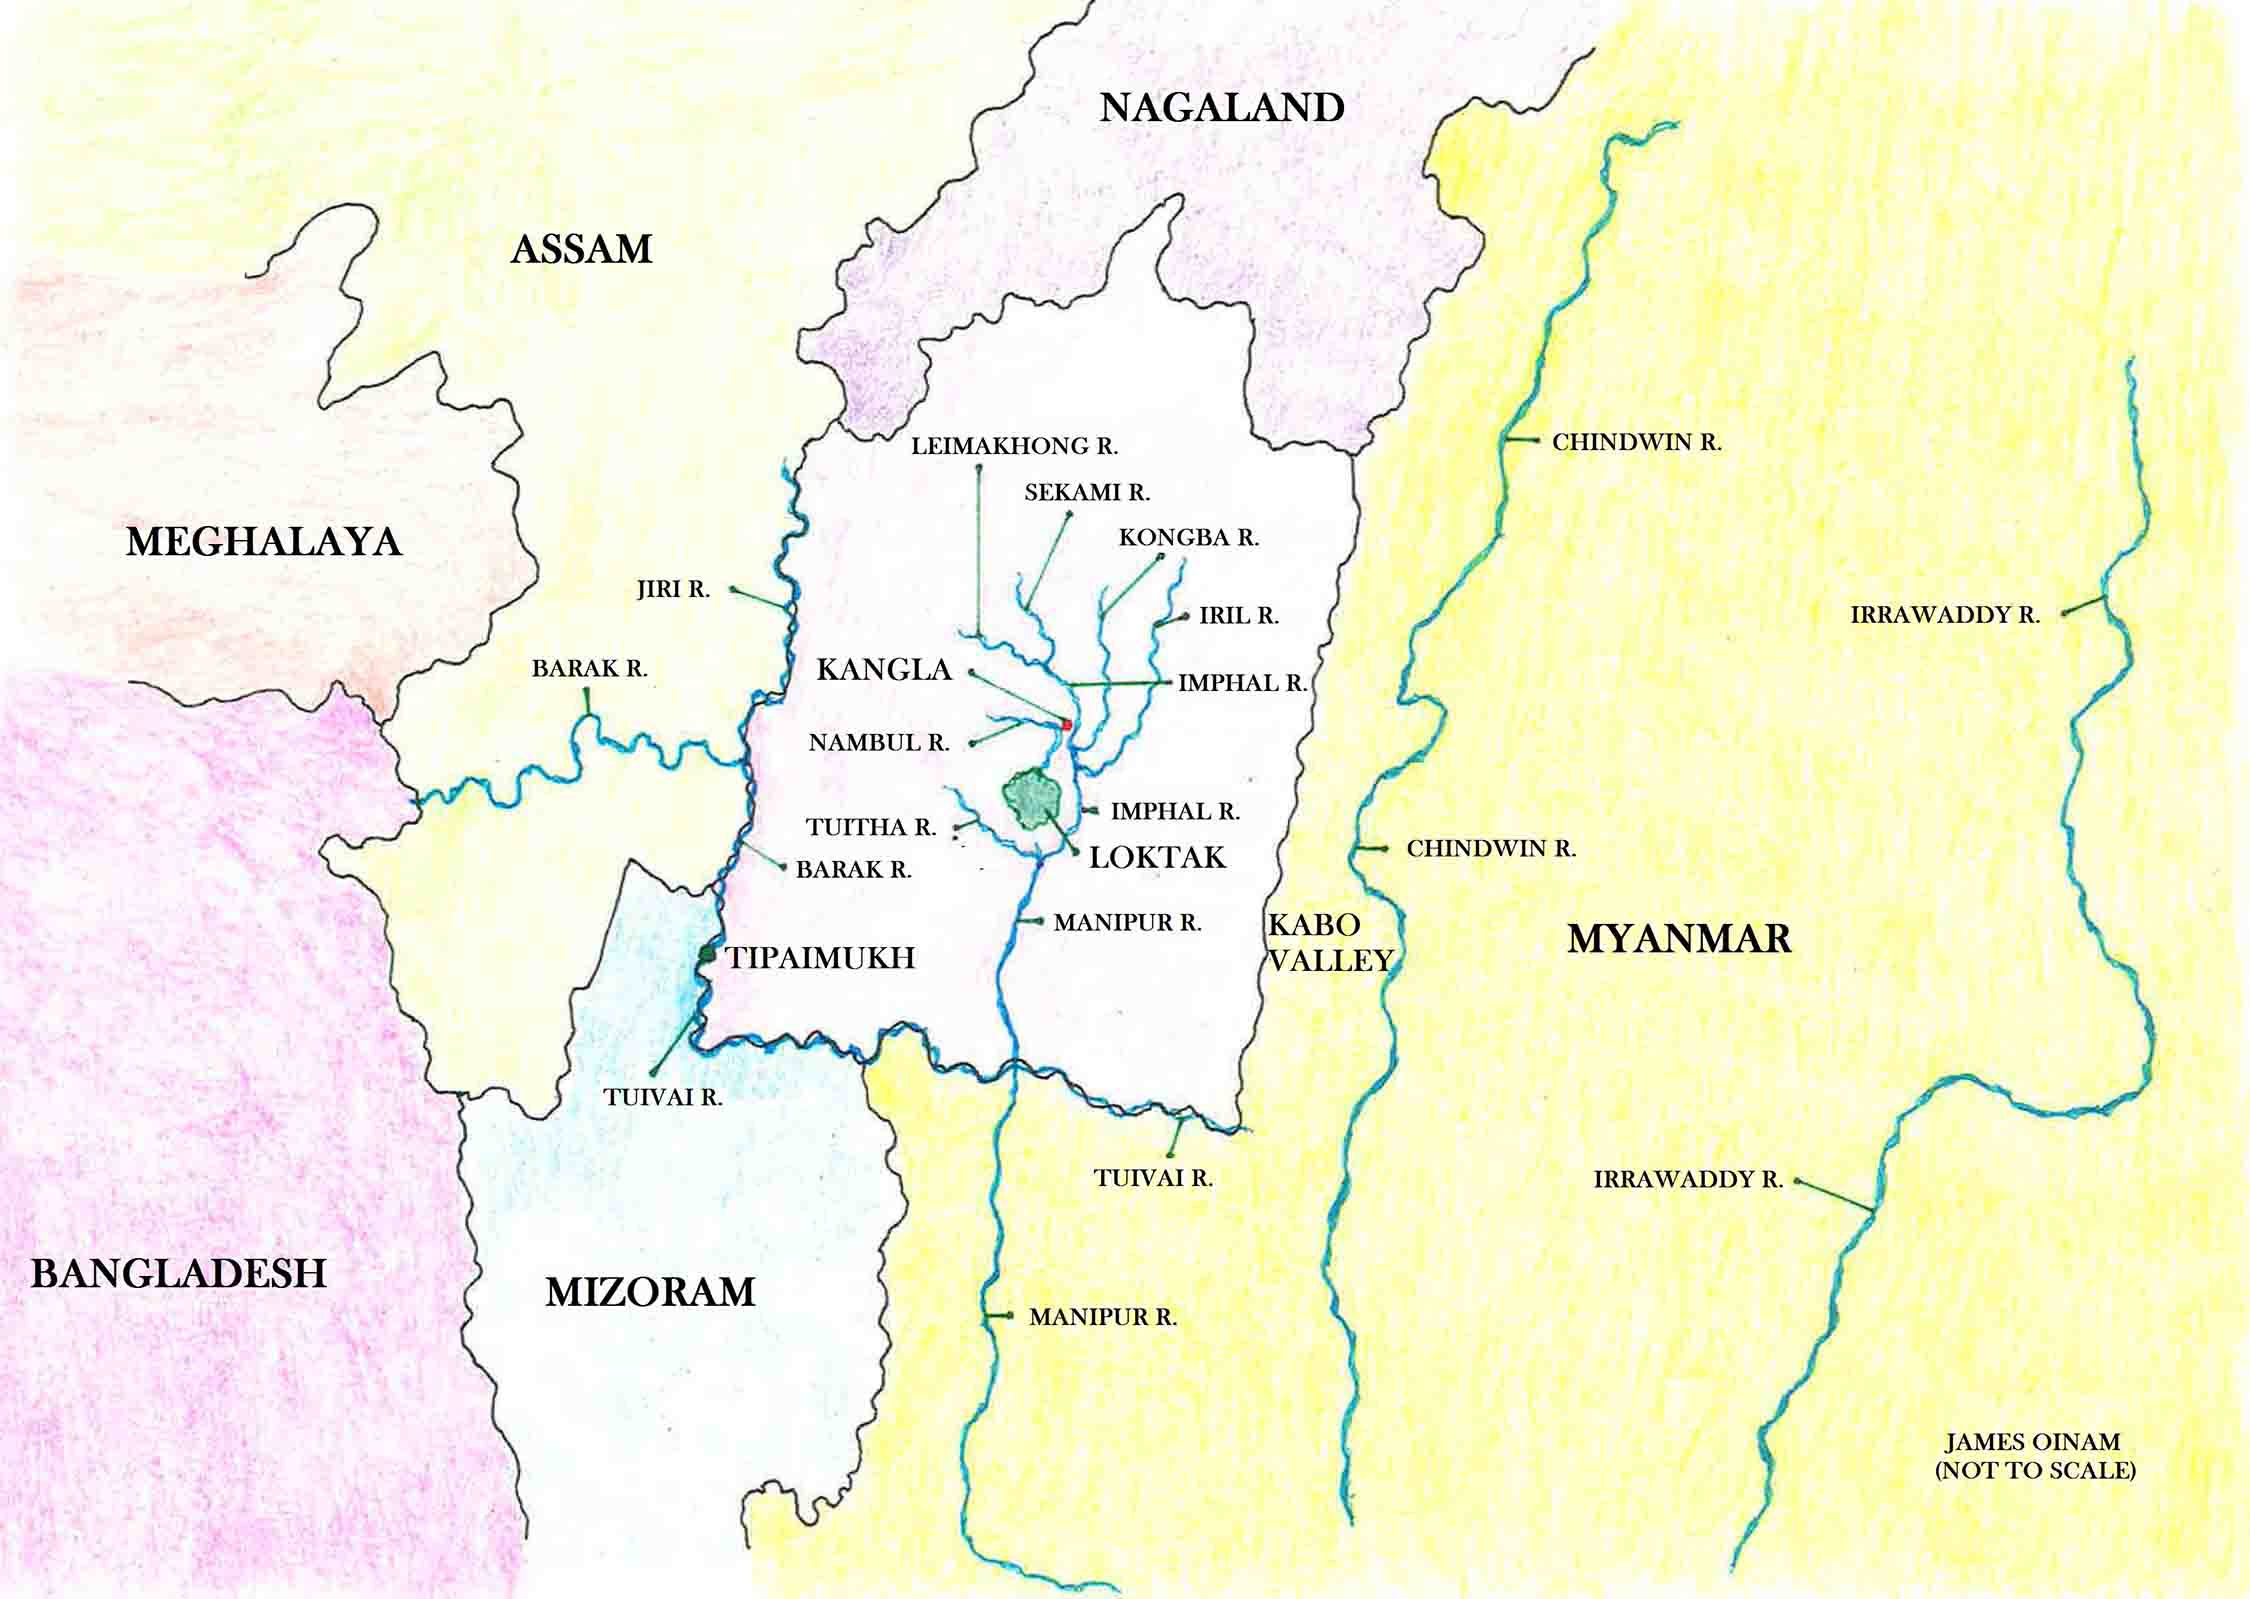 Rivers of Manipur